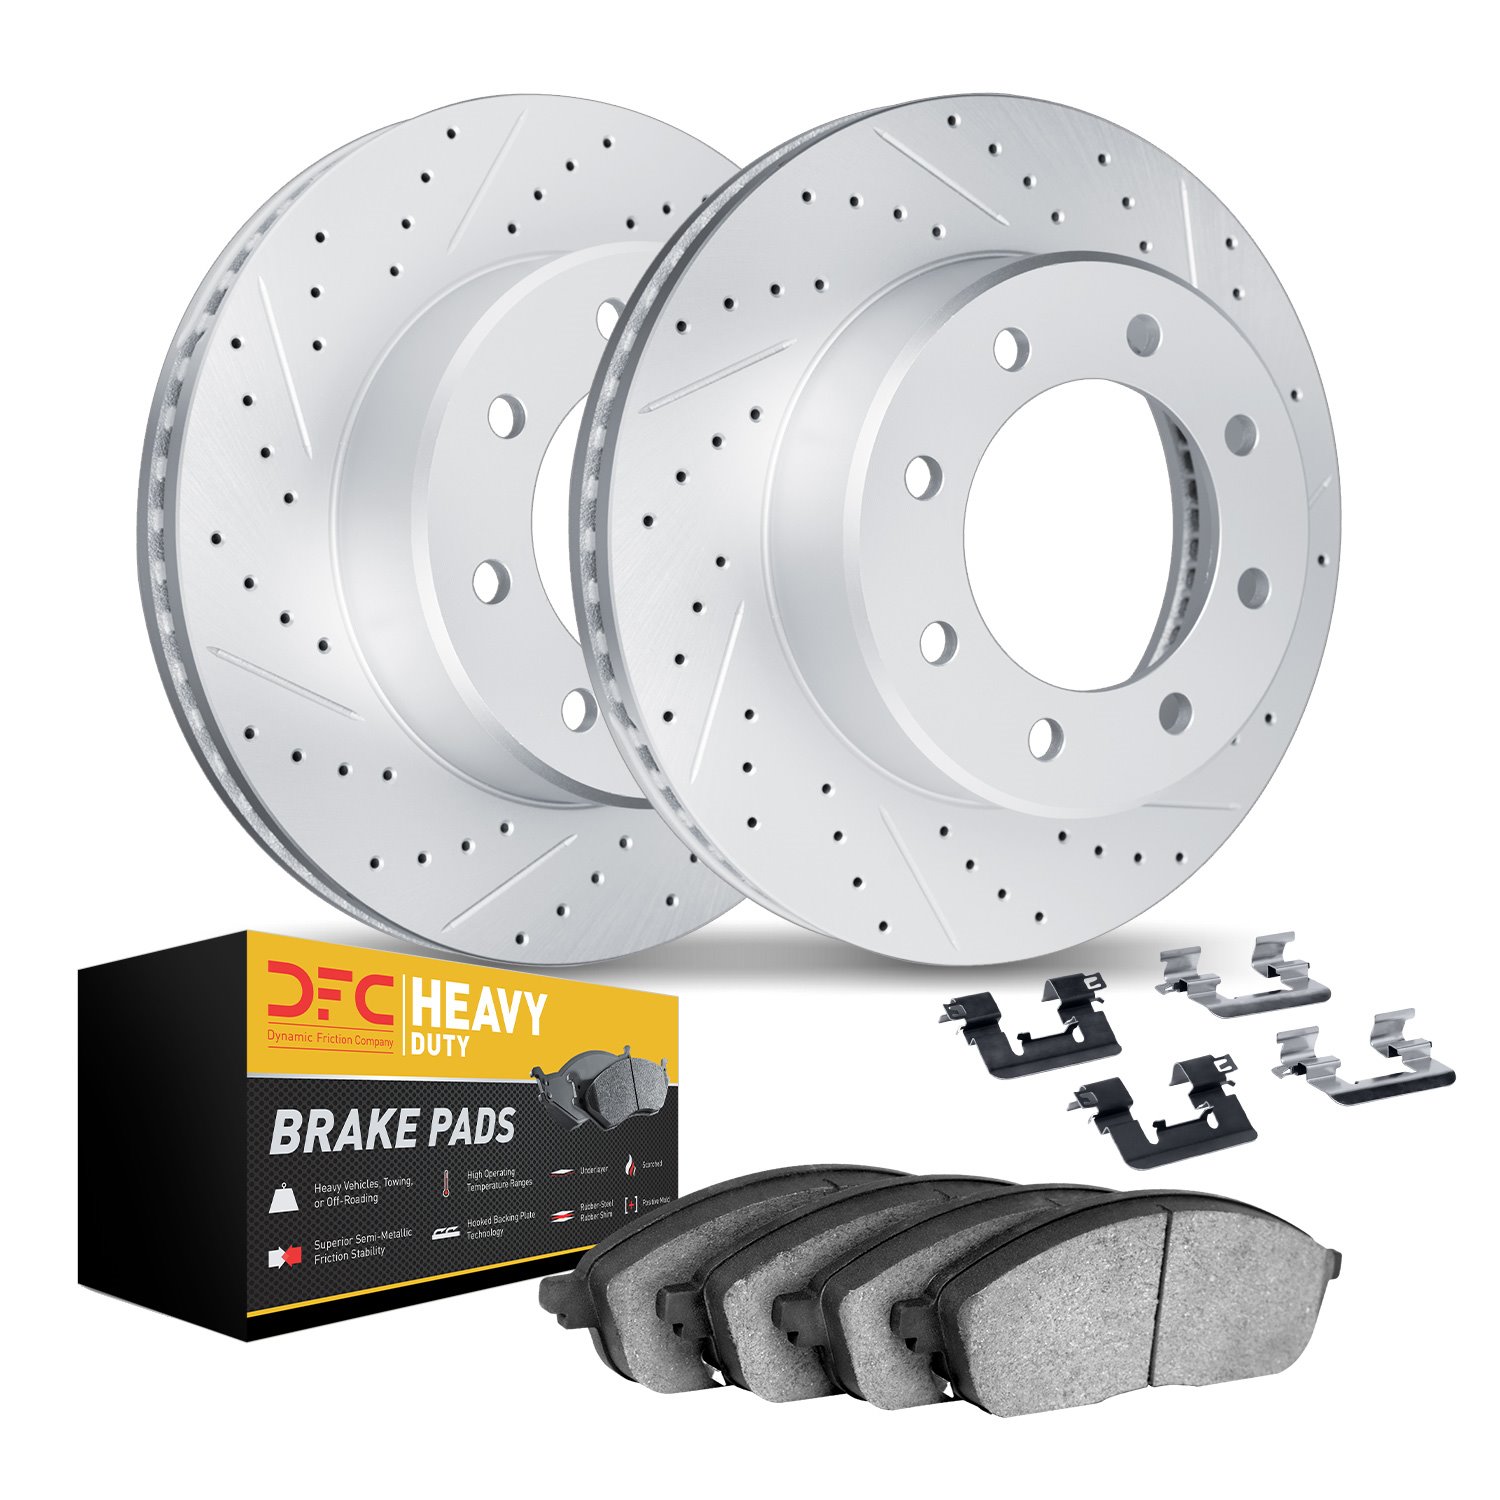 2212-99099 Geoperformance Drilled/Slotted Rotors w/Heavy-Duty Pads Kit & Hardware, 1999-1999 Ford/Lincoln/Mercury/Mazda, Positio